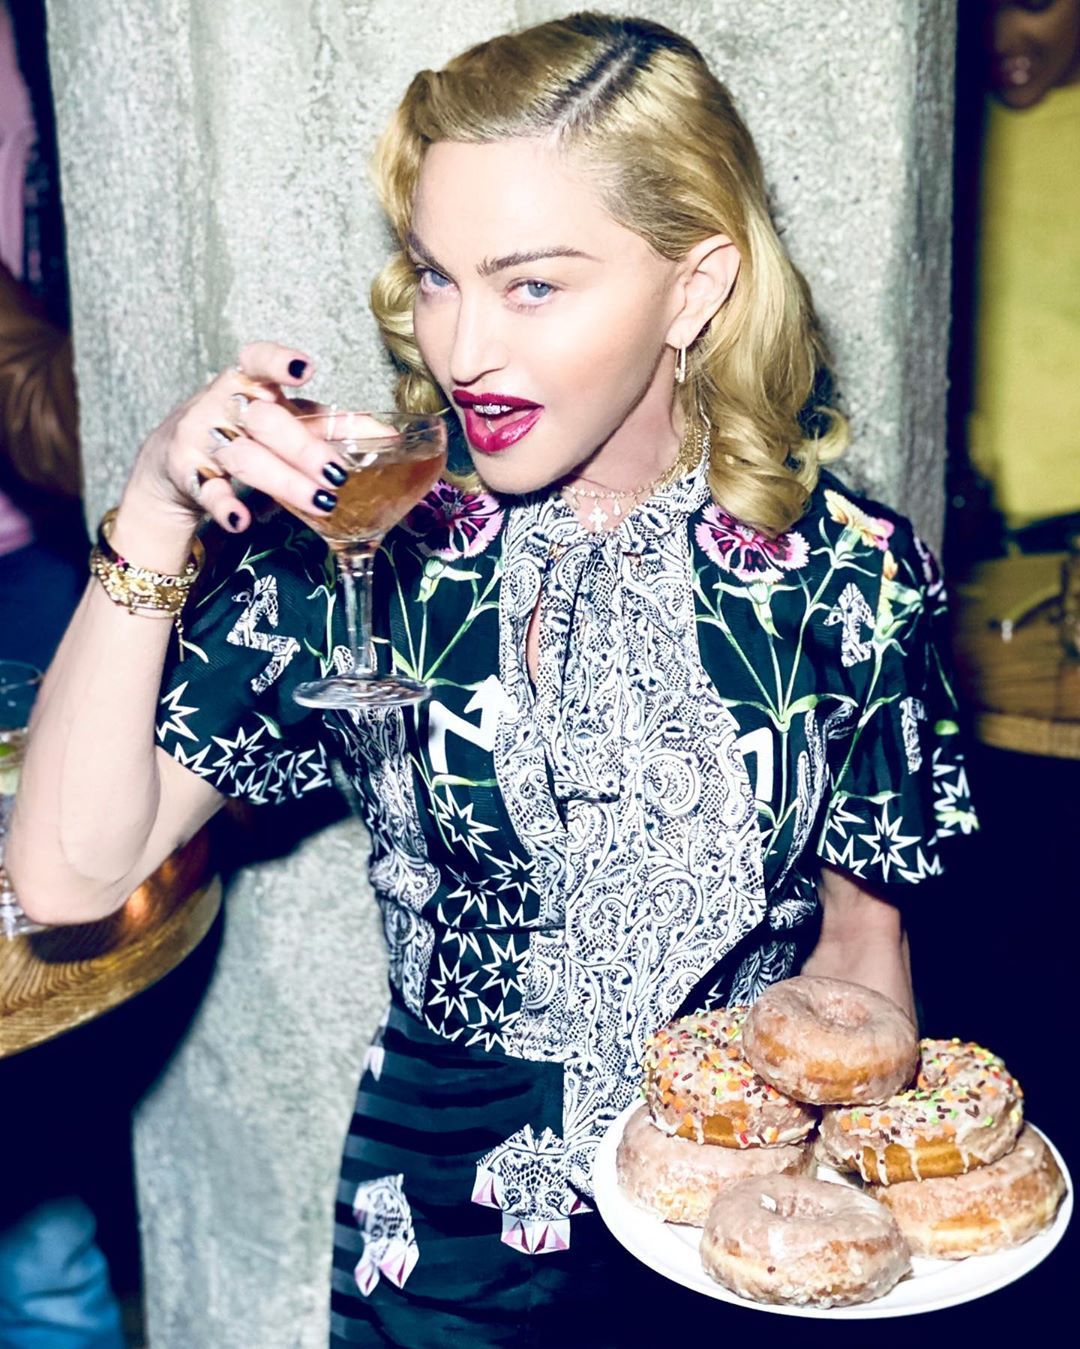 Singer Madonna Has An Unusual Post Show Routine Where She Takes An Ice Bath And Drinks Her Own Urine